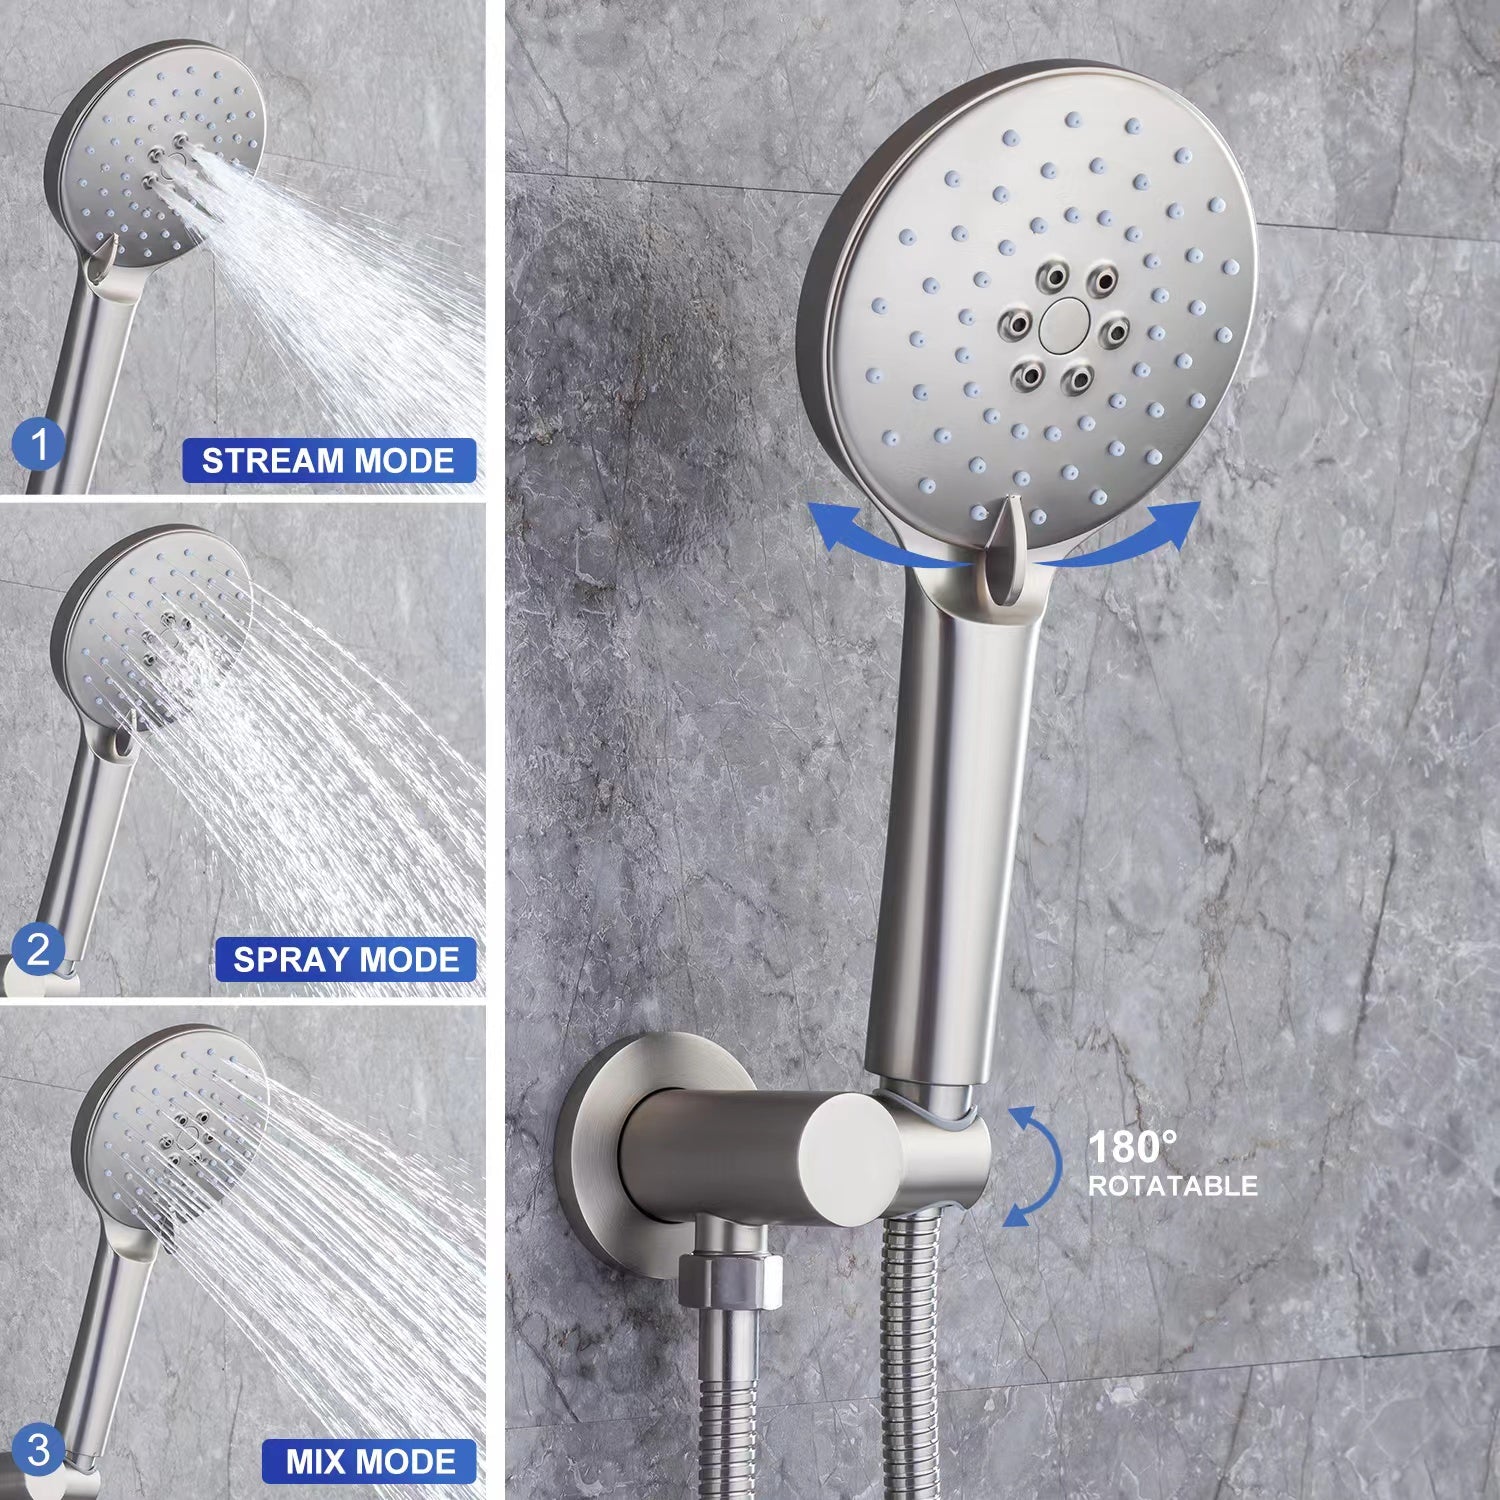 【Rainlex RX96203-10】10" Shower Head three Function Wall-Mount  Pressure Balance Round Shower Faucet(Rough-in Valve Included)